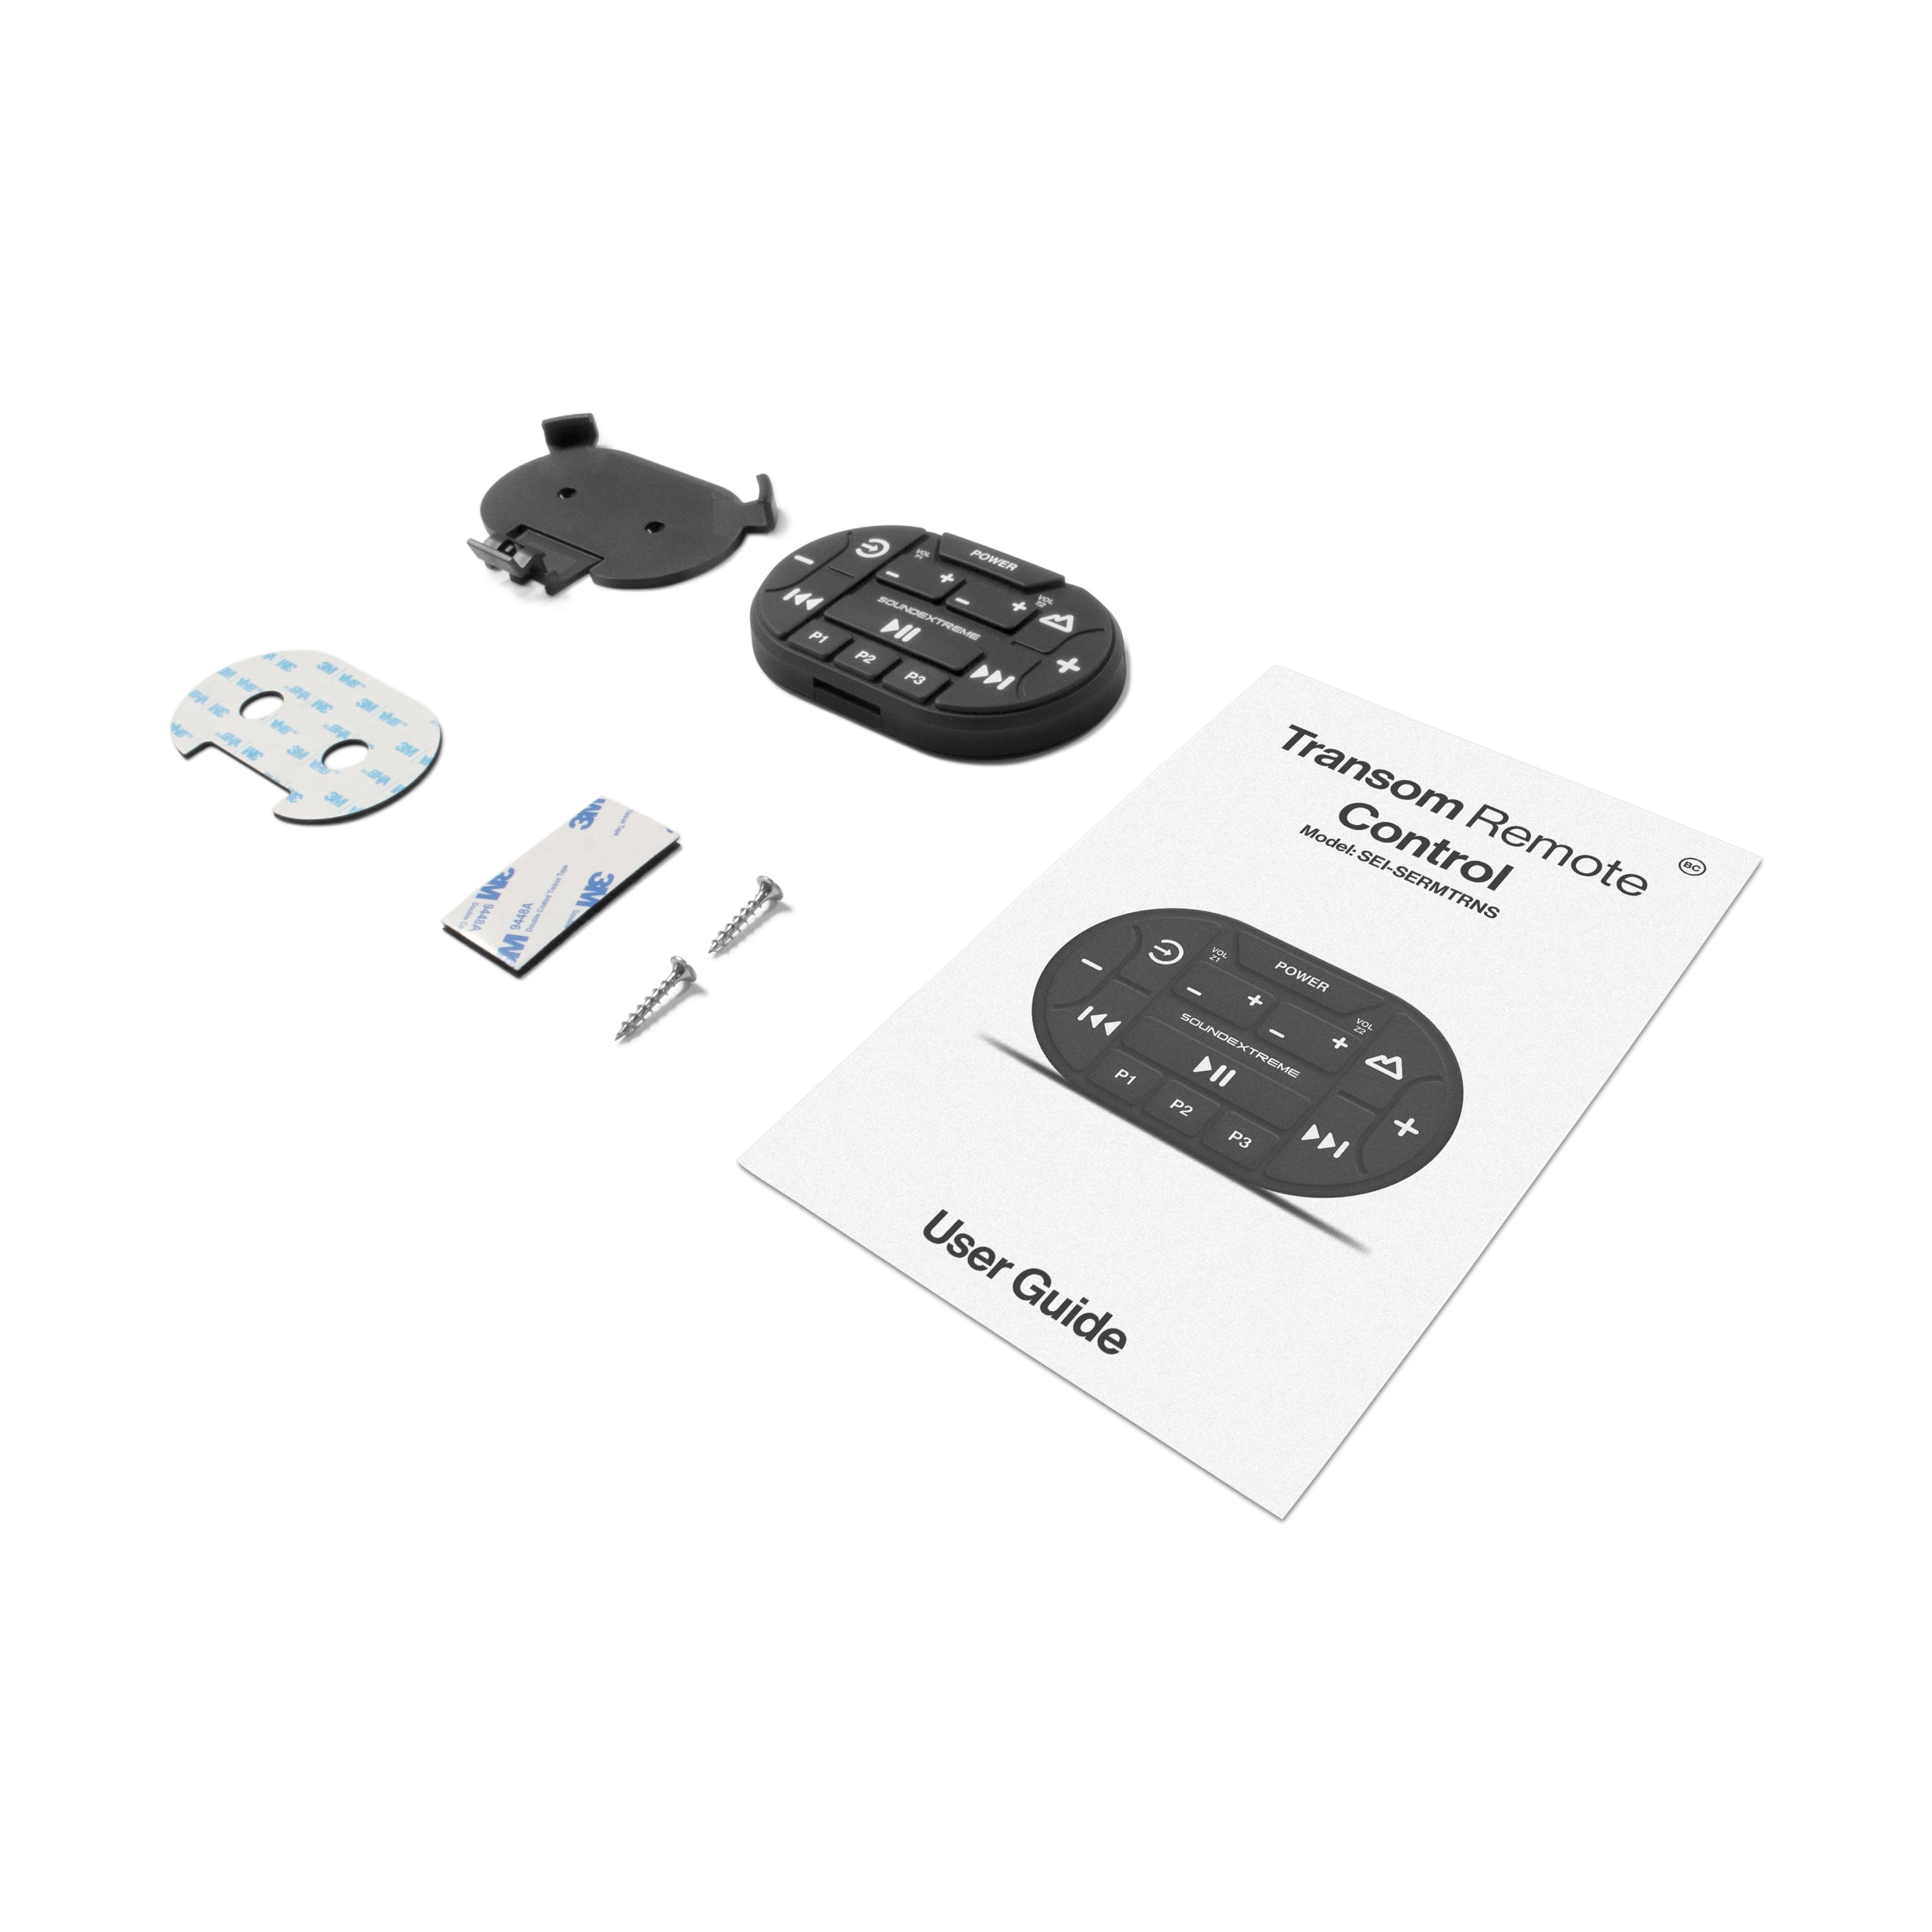 SoundExtreme by ECOXGEAR Transom Remote Kit What's In The Box